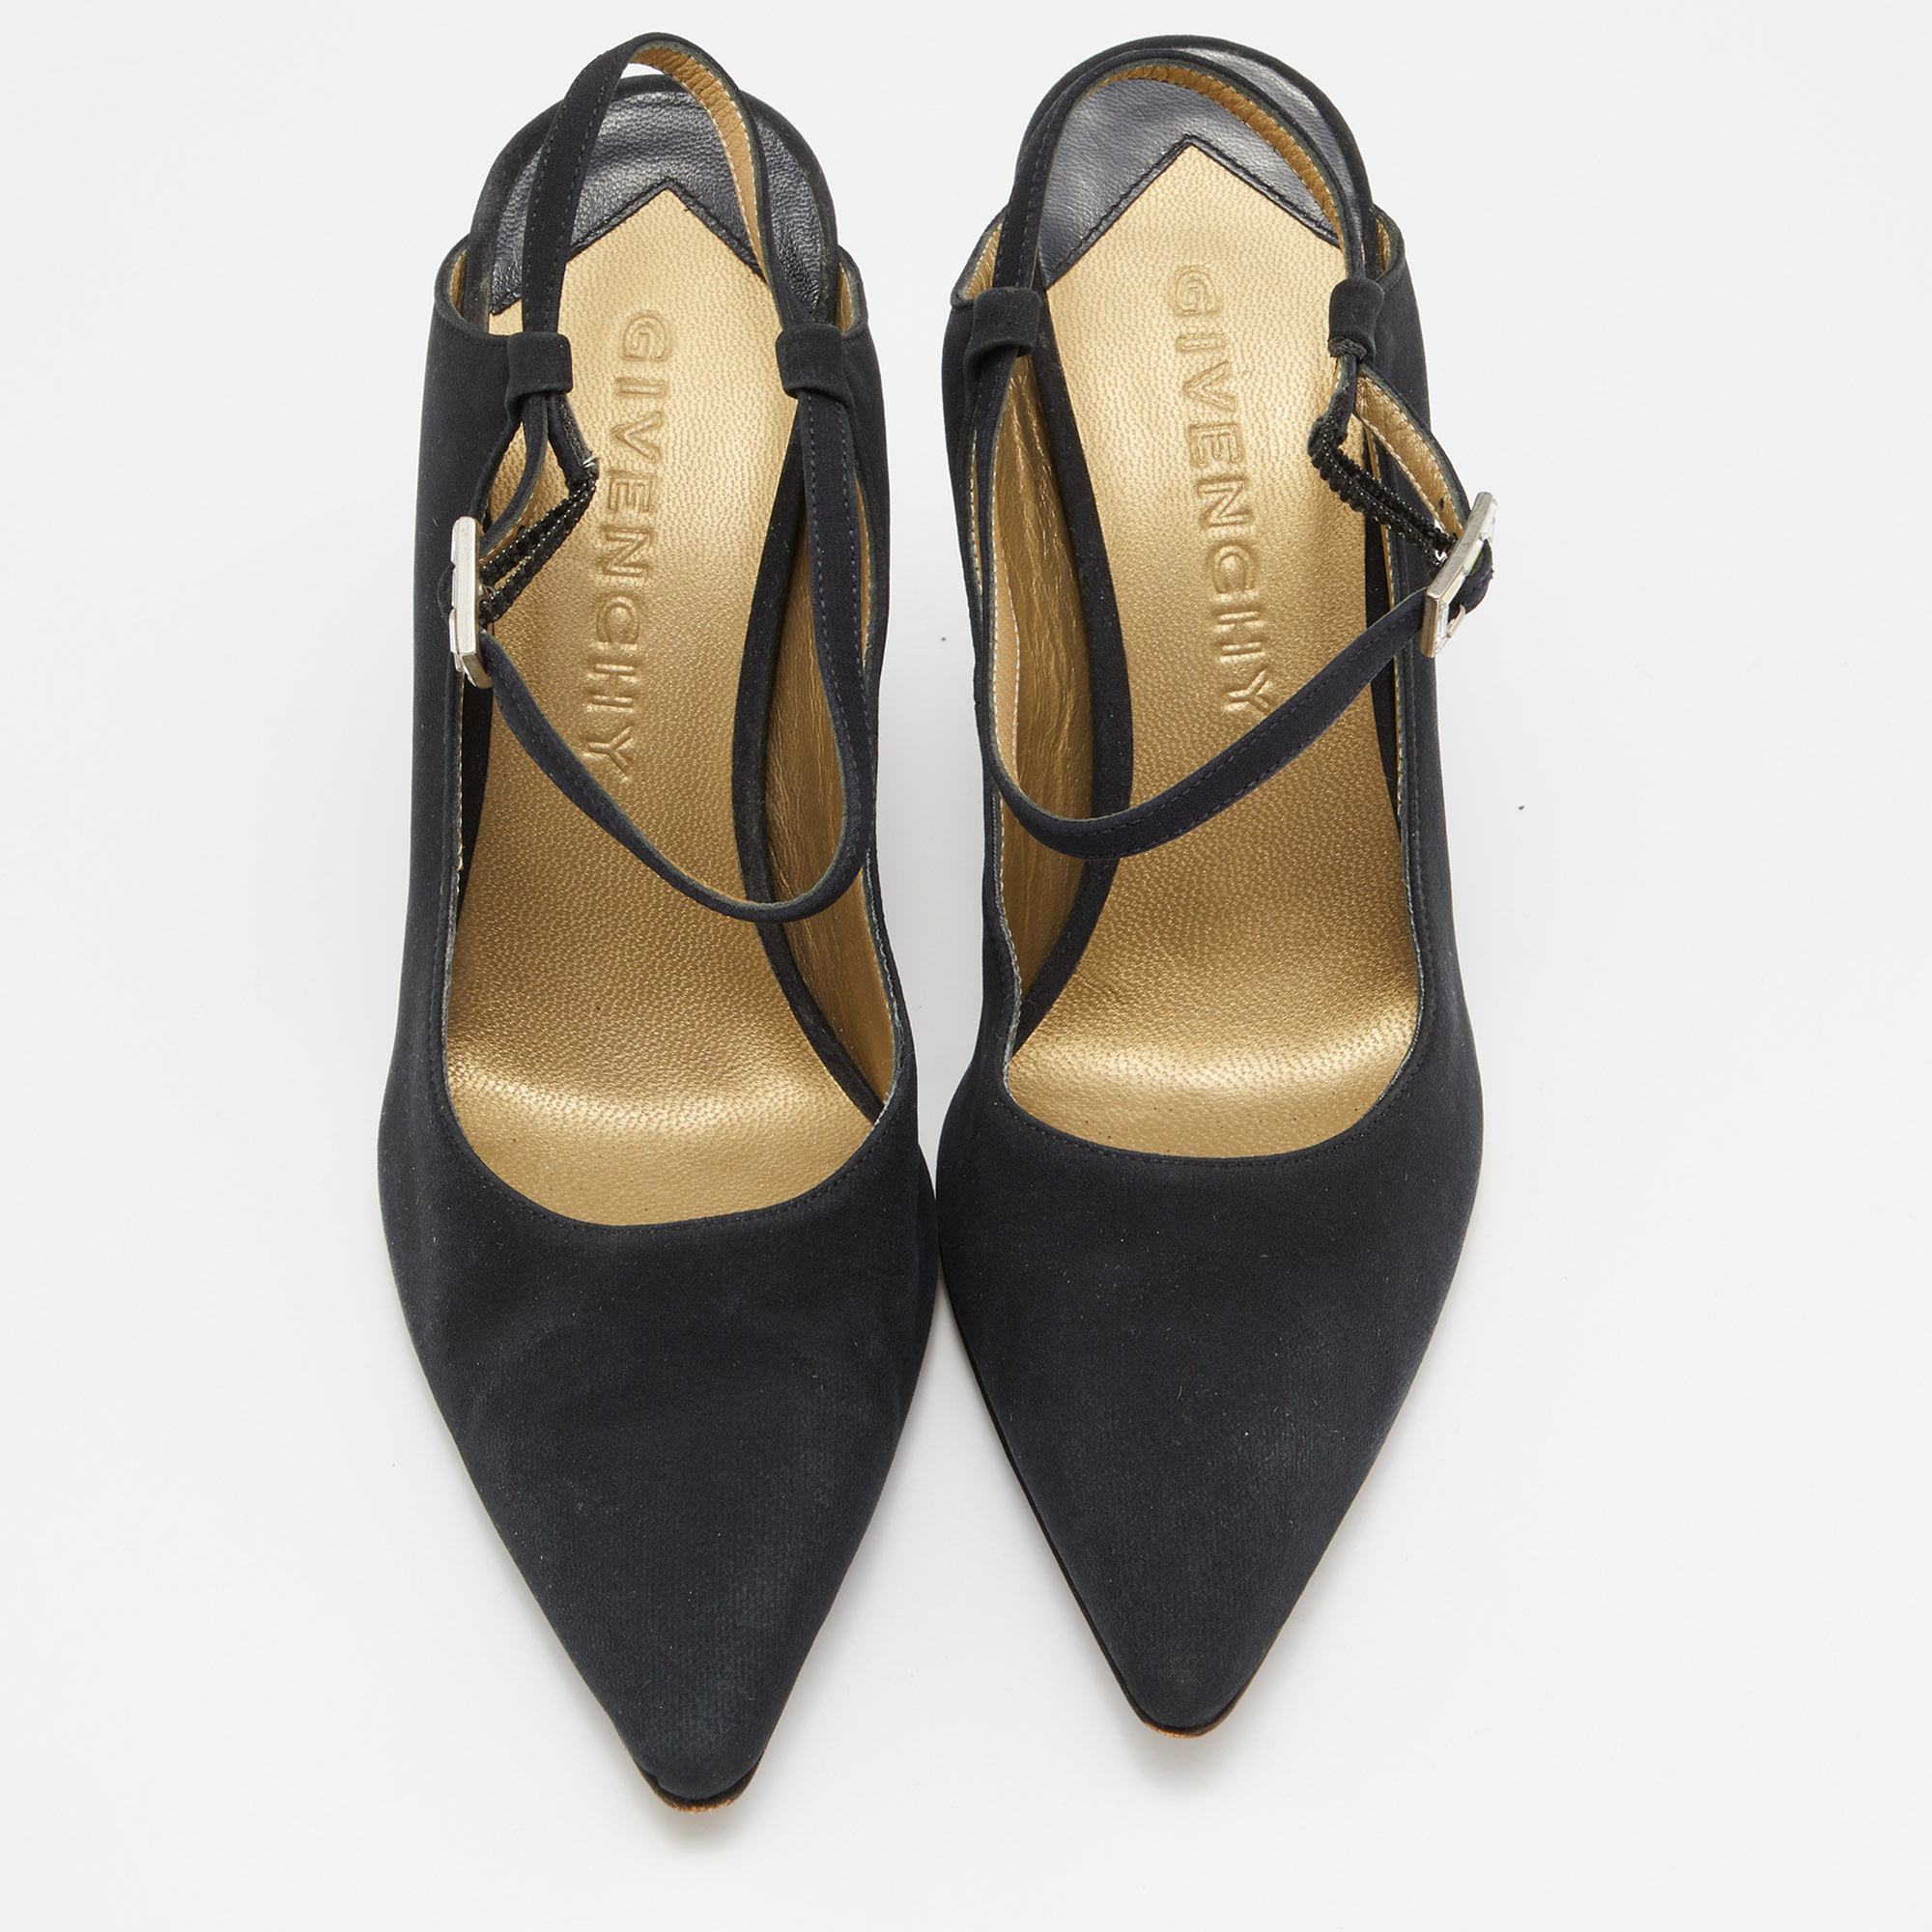 Givenchy Black Fabric Pointed Toe Slingback Pumps Size 36